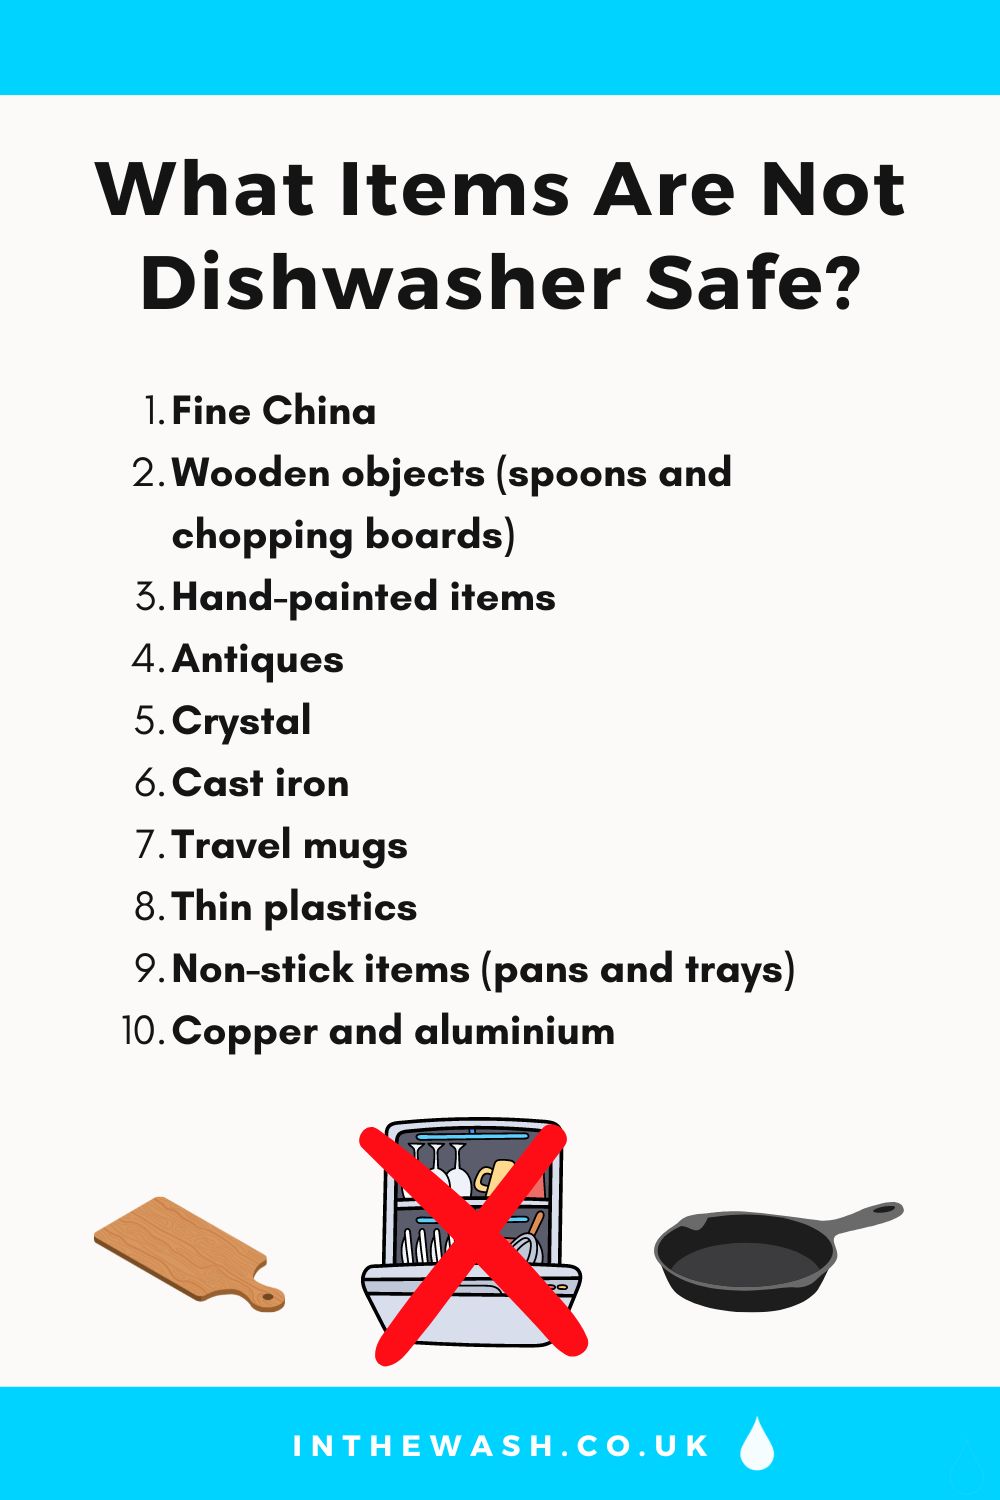 Items that are not dishwasher safe